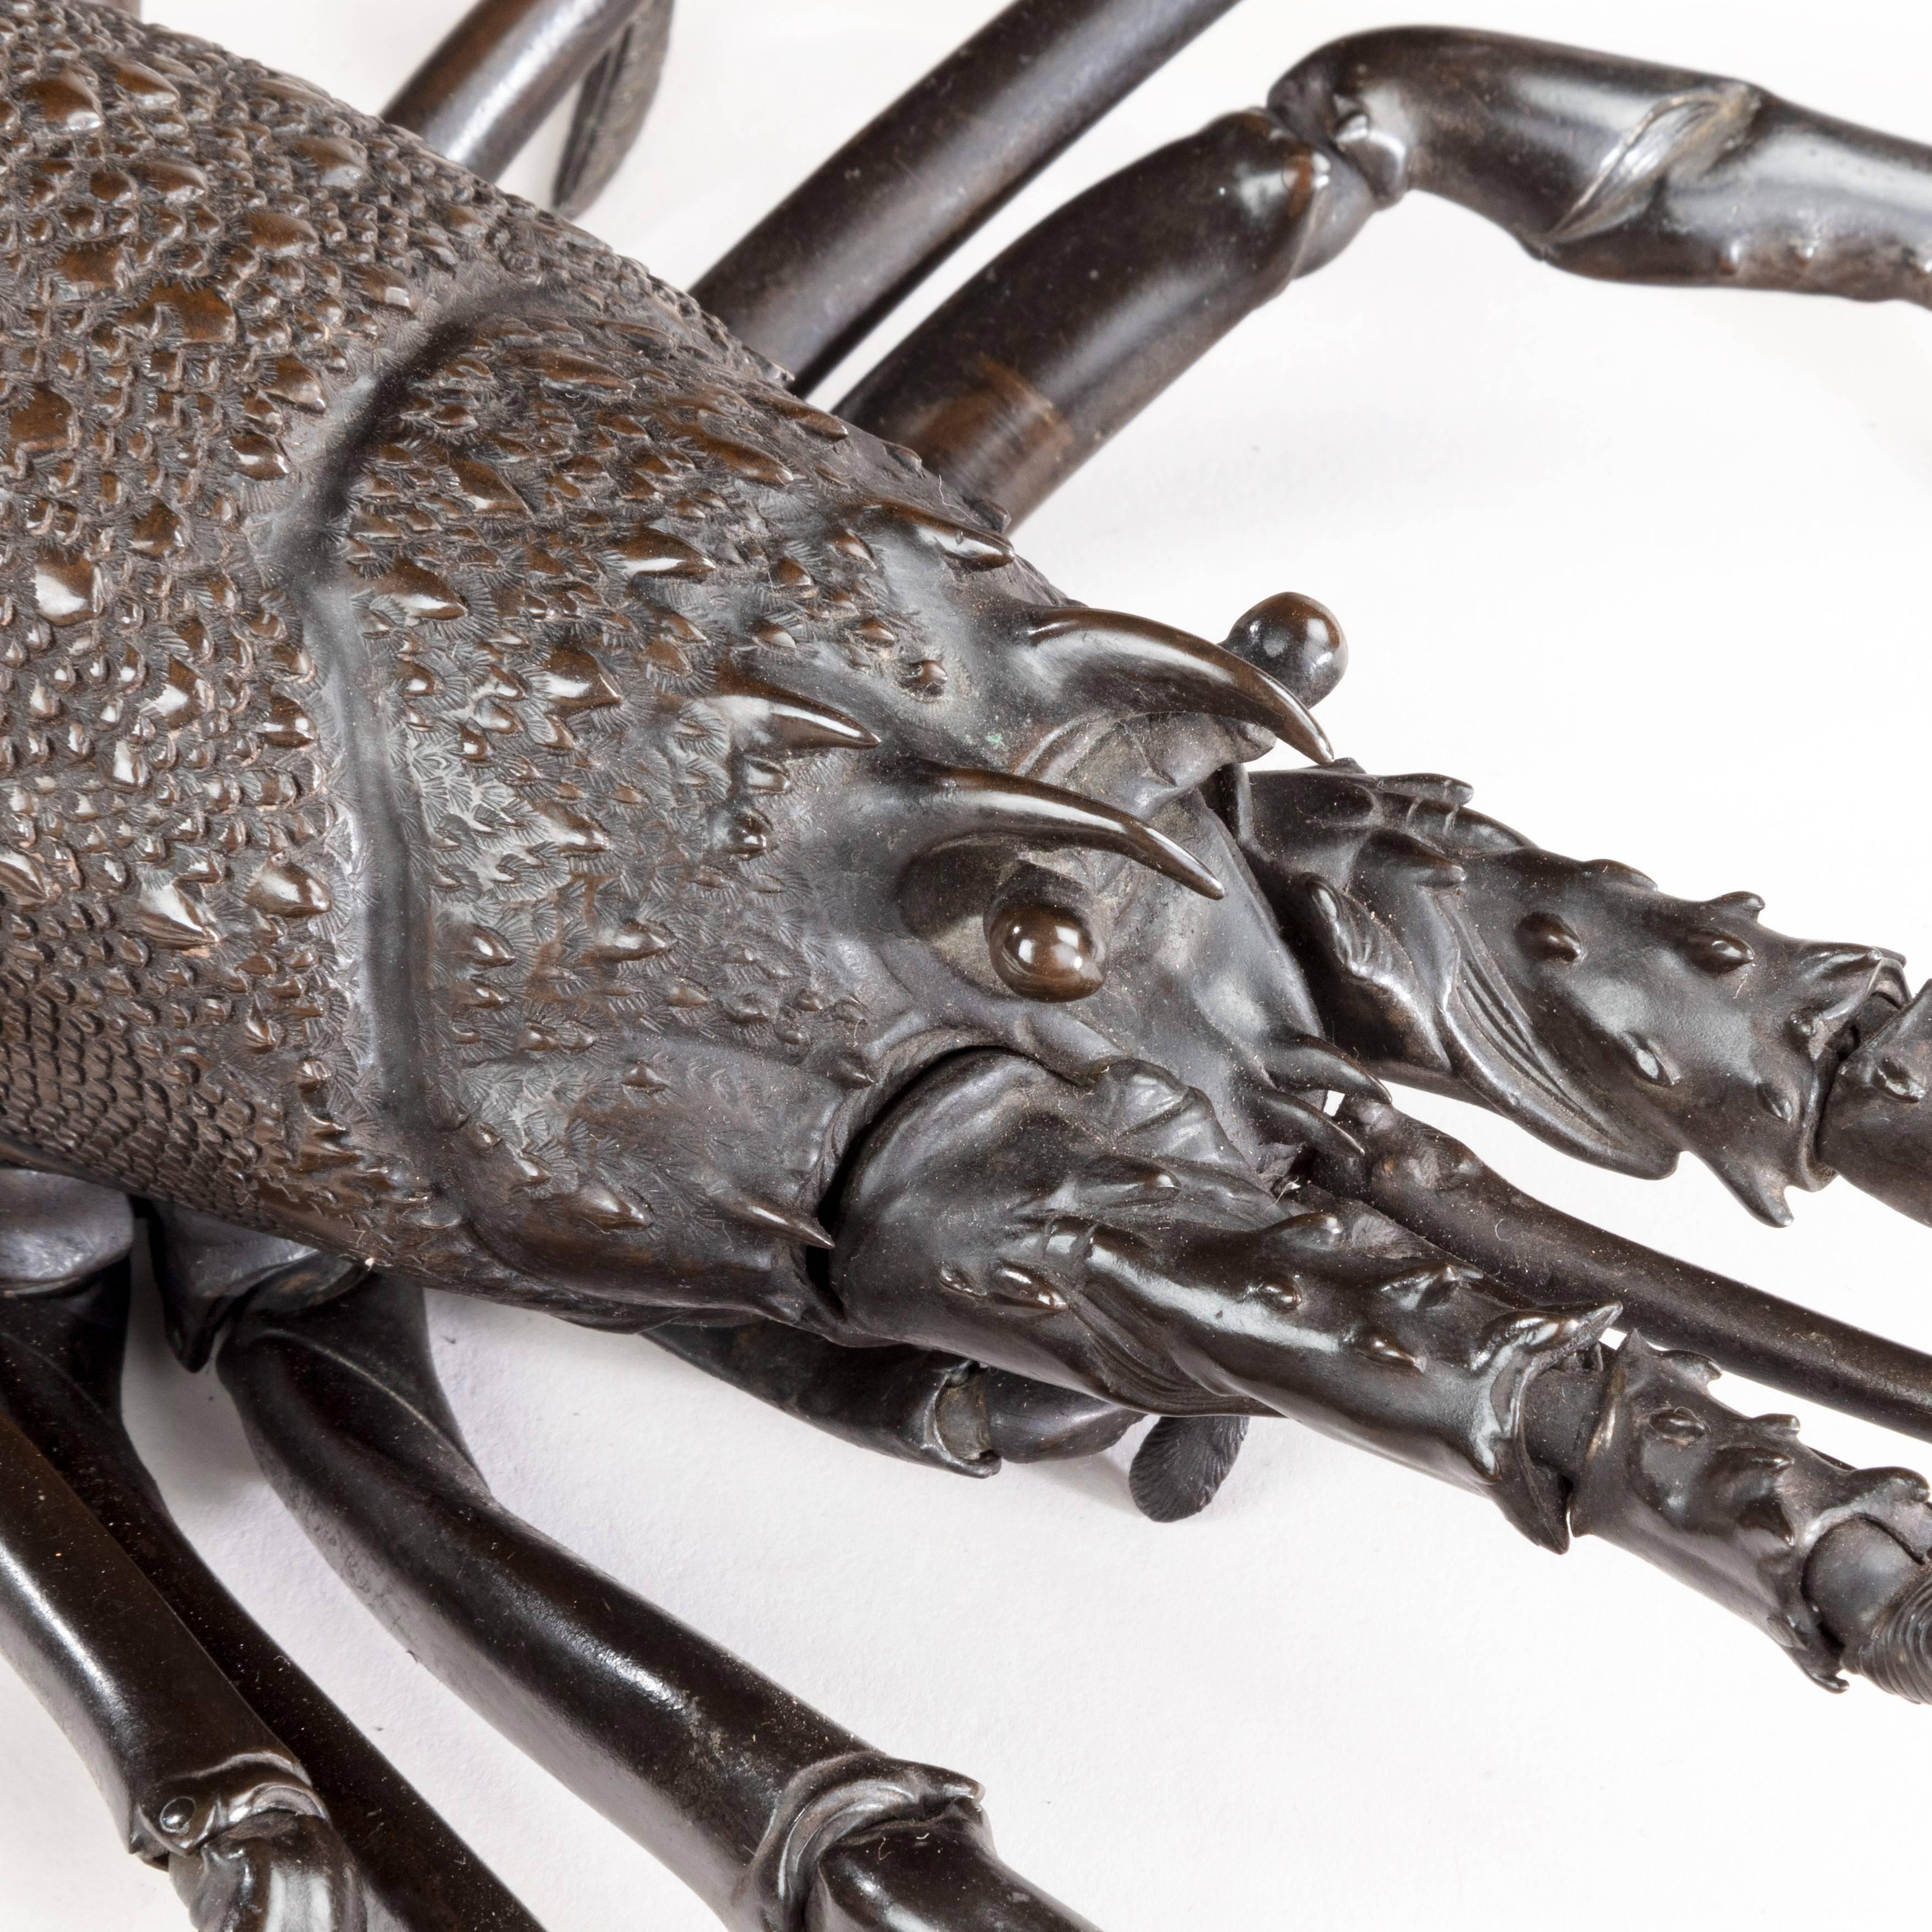 A fine quality Meiji period bronze okimono of a lobster, realistically modelled and fully articulated. Japanese, circa 1890.
Measure: L 16” (41cm).